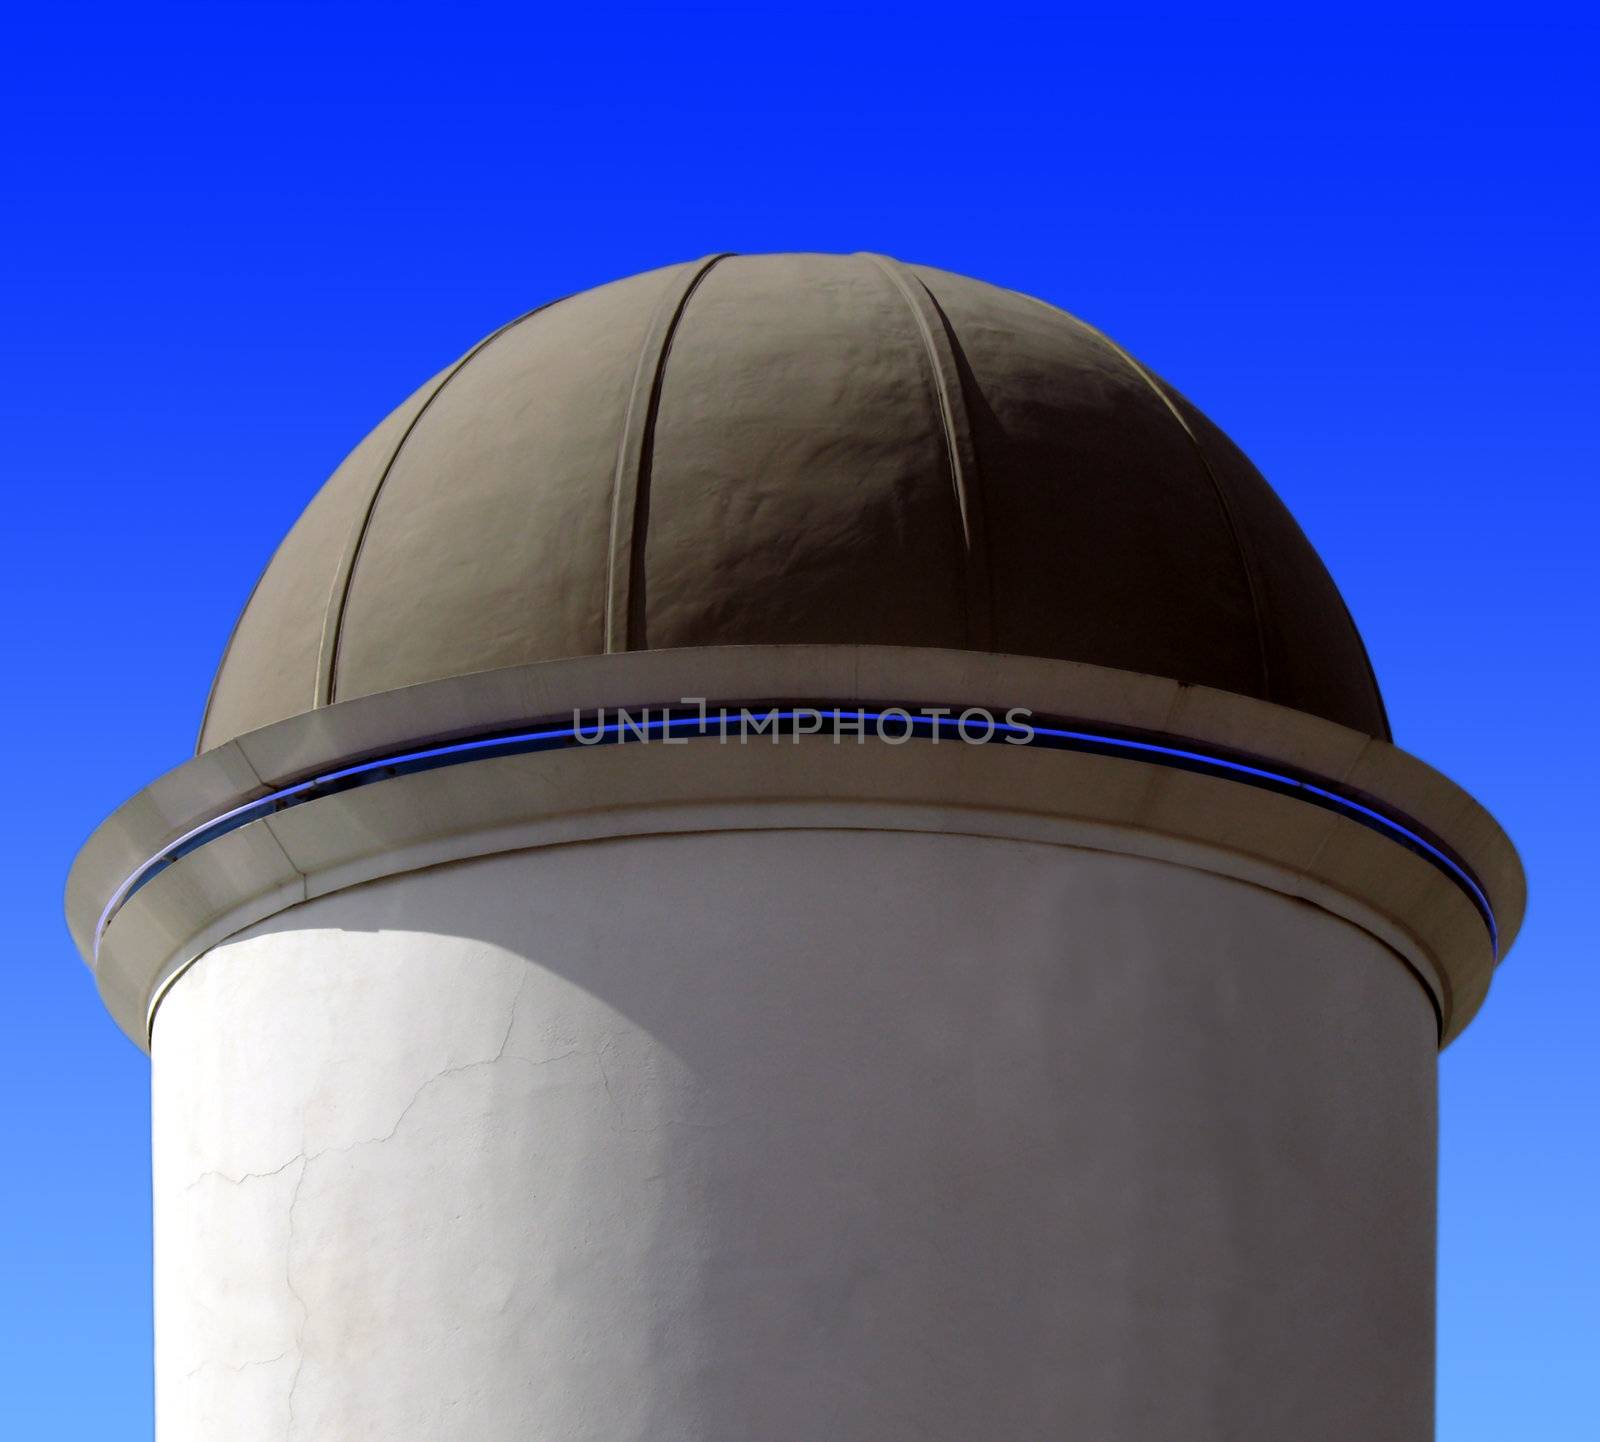 Domed architectural feature against a rich blue noiseless sky